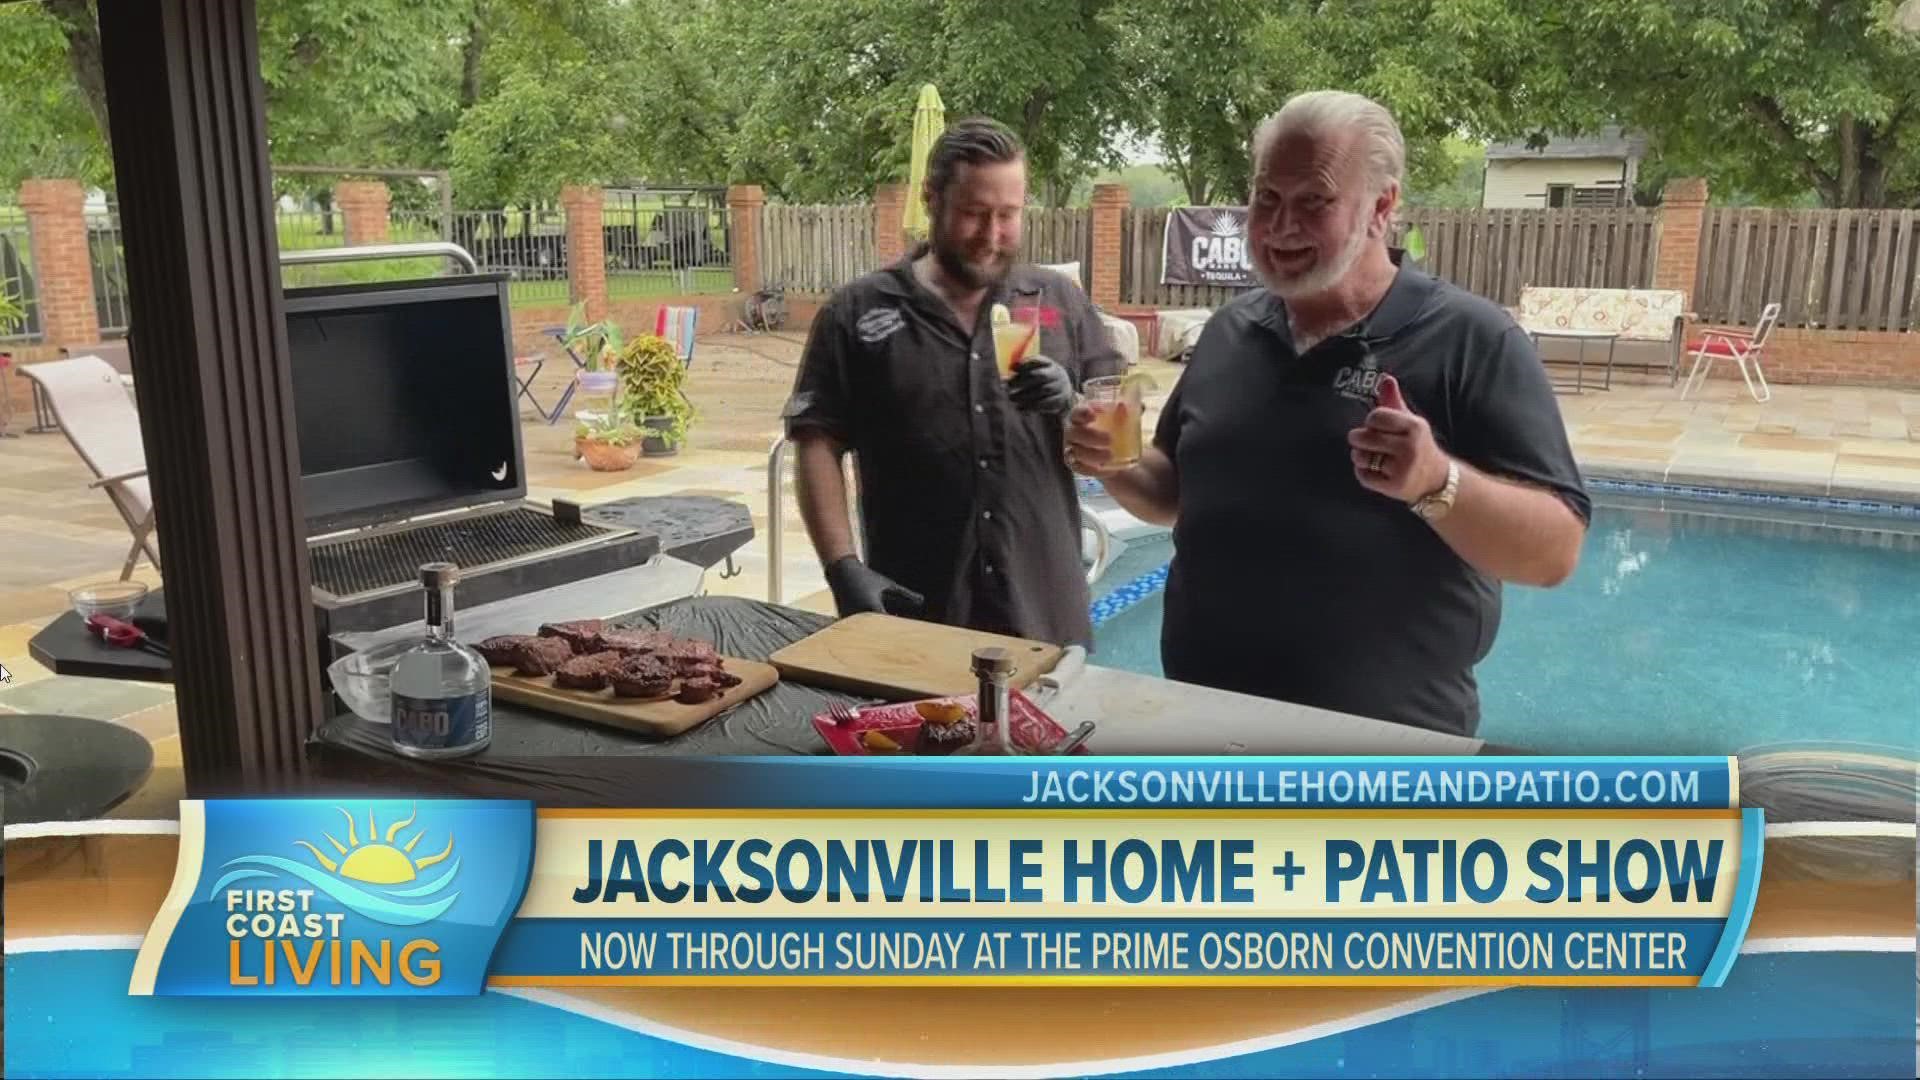 The "Winningest Man in BBQ," Myron Mixon shares what to expect during his demo at the Prime Osborn Convention Center.